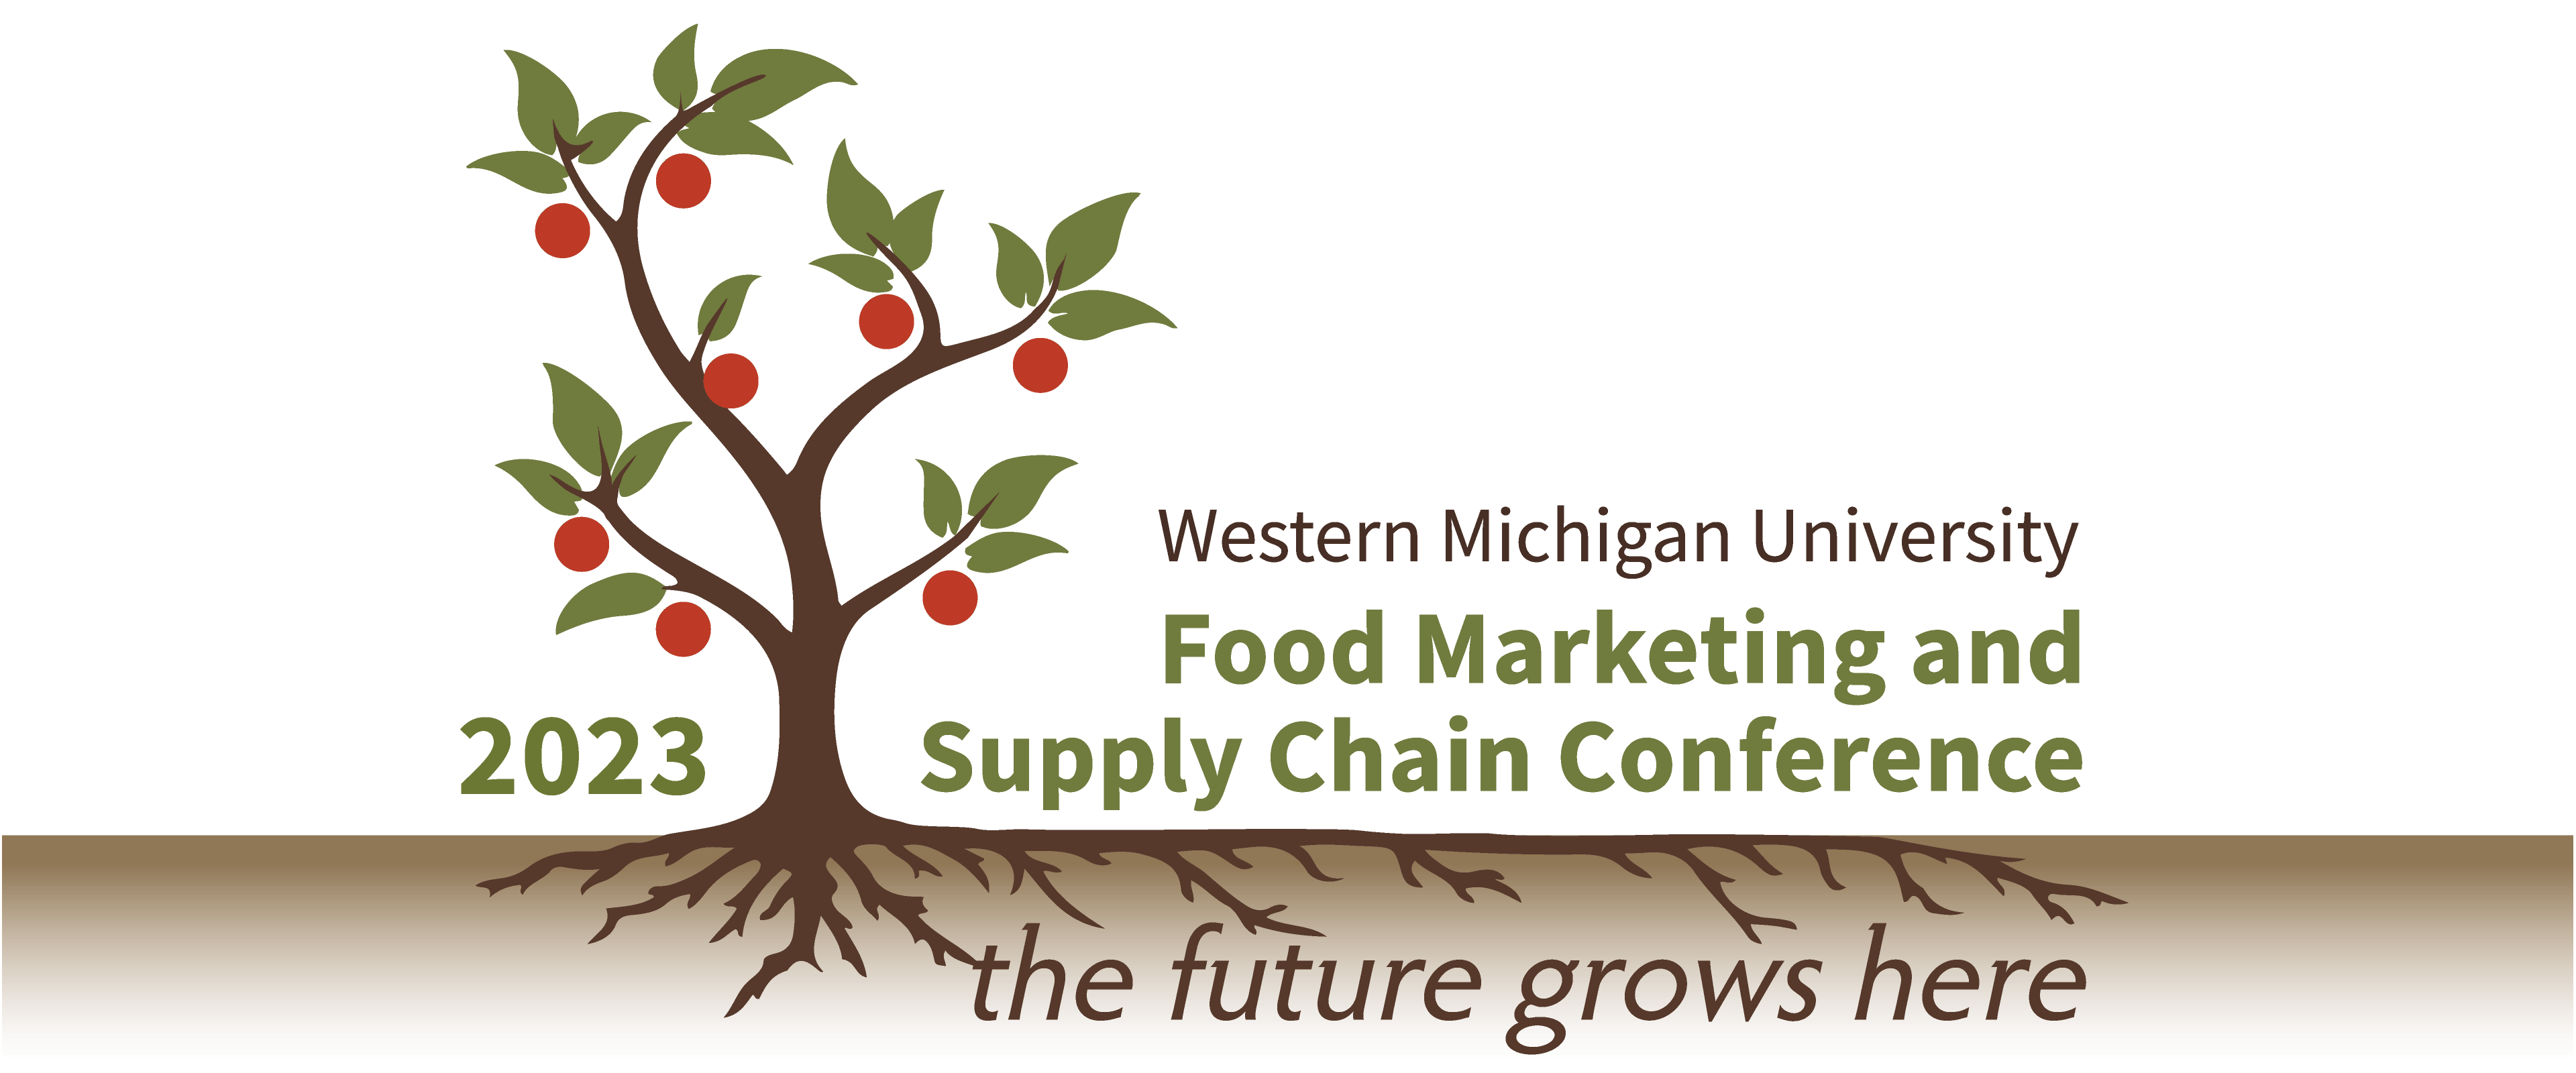 2023 Western Michigan University Food Marketing and Supply Chain Conference